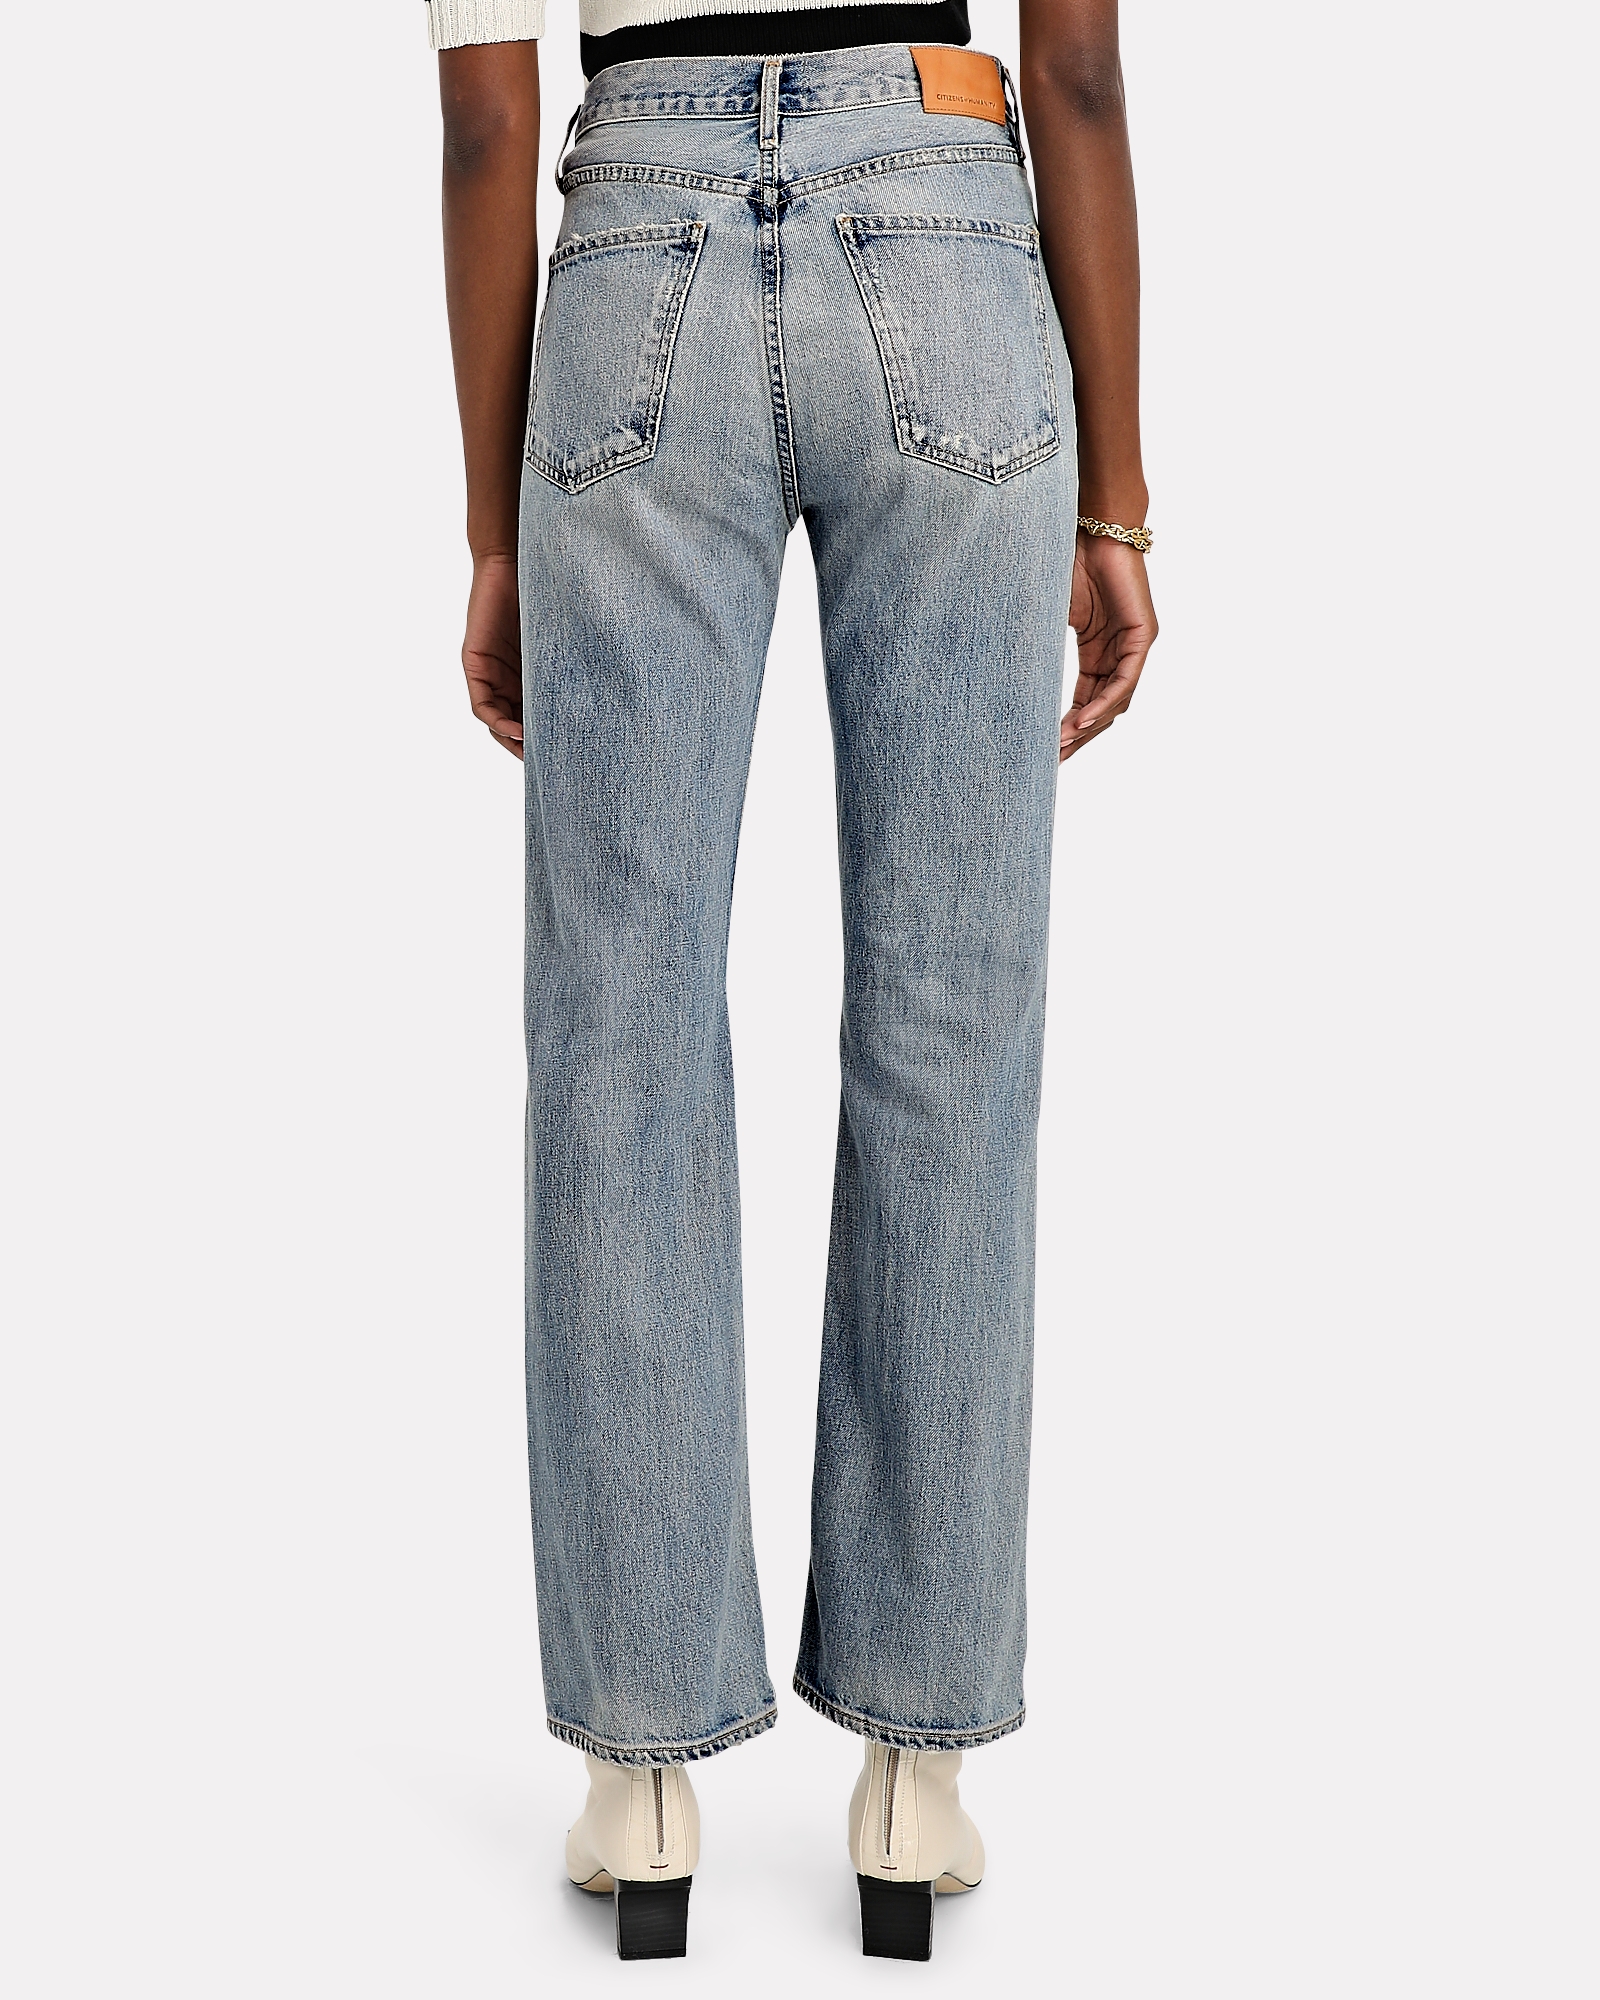 Citizens of Humanity Libby High-Rise Bootcut Jeans | INTERMIX®